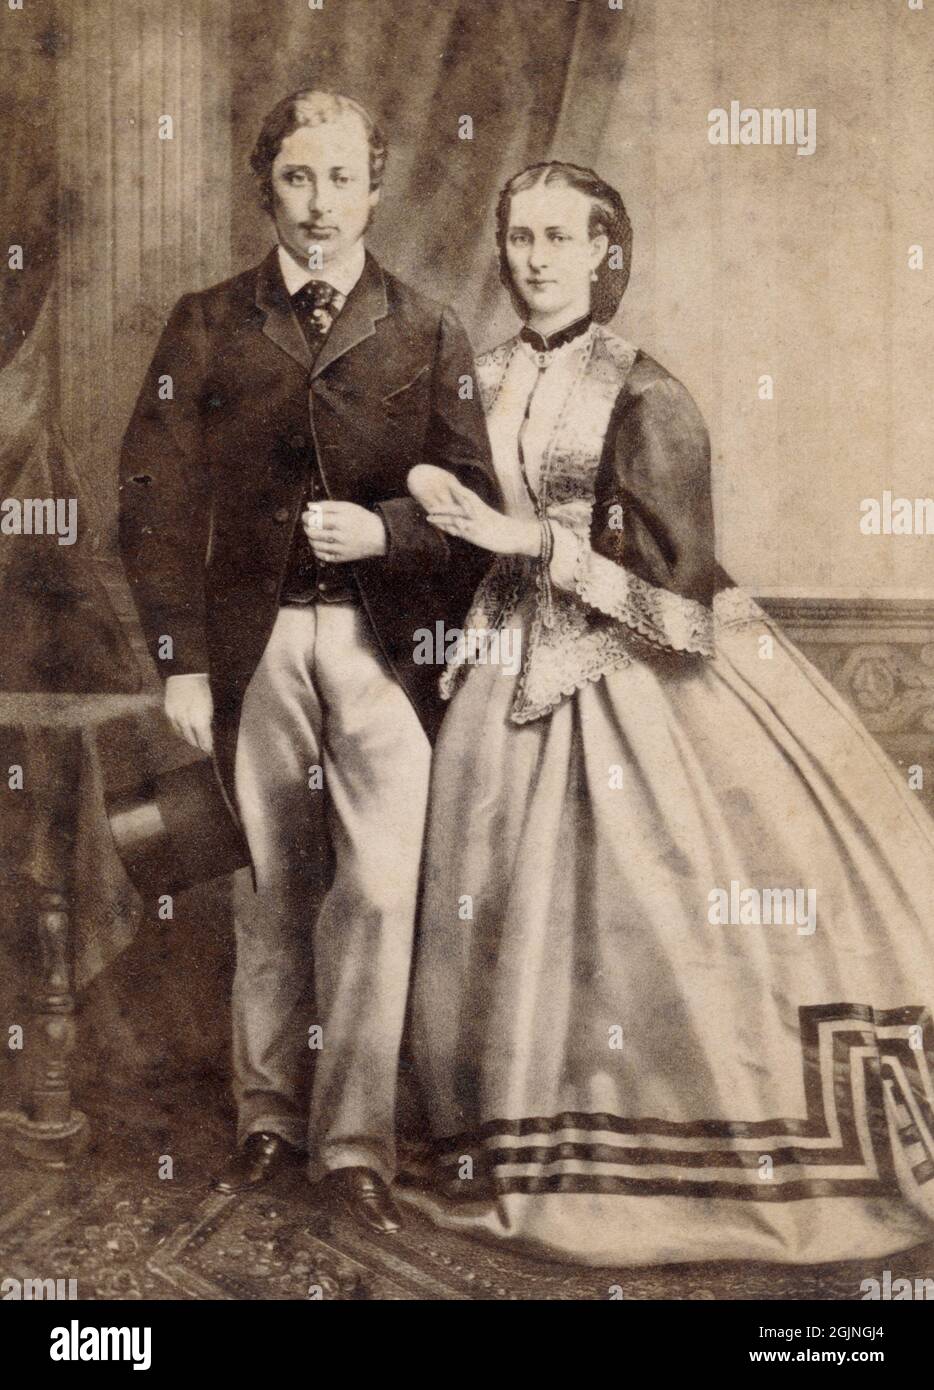 Prince of Wales (later King Edward VII) and Princess of Wales (Princess Alexandria of Denmark) about 1865 Stock Photo